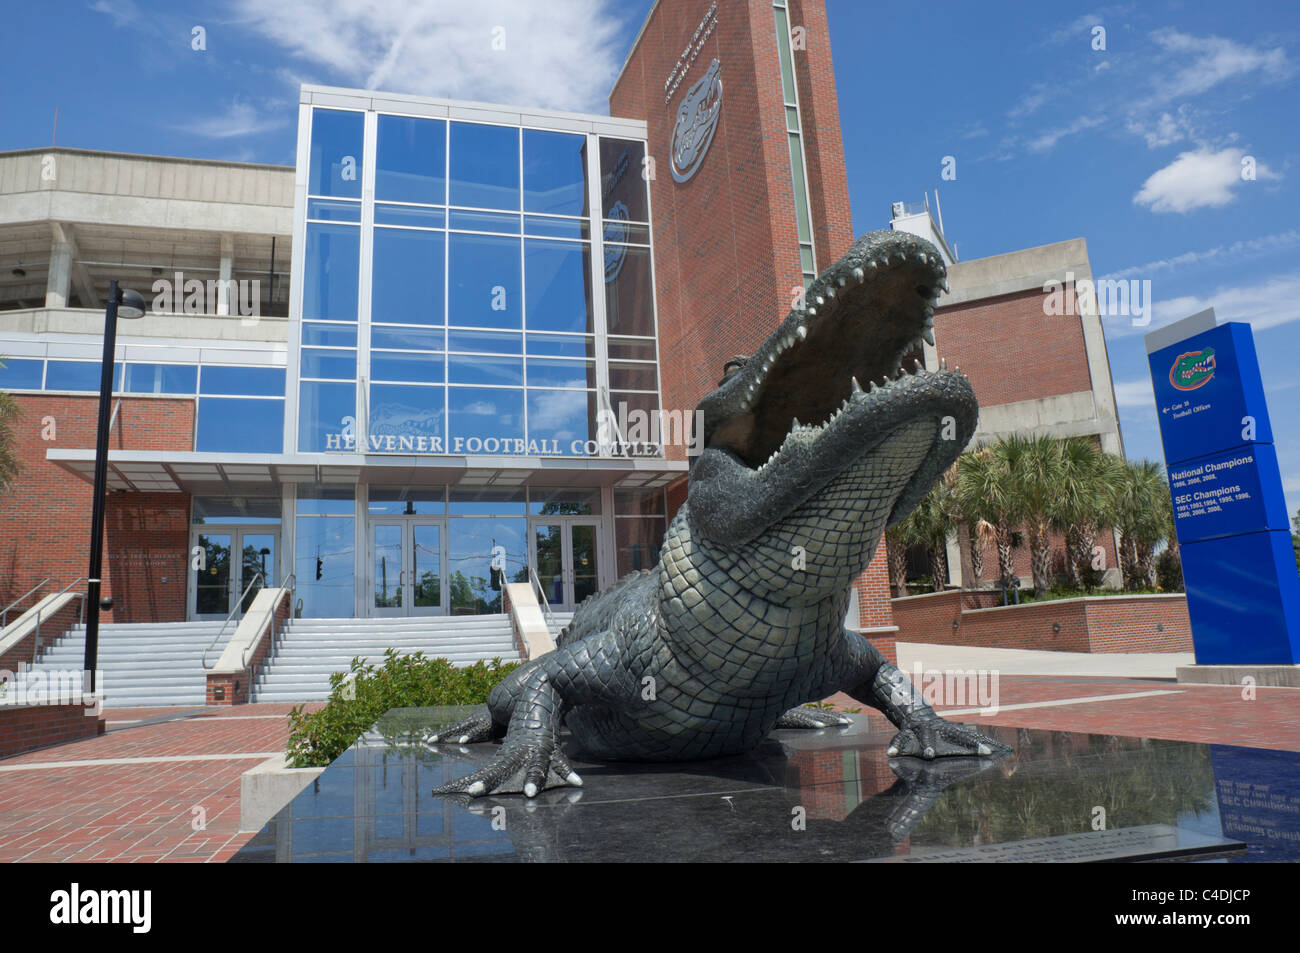 Bull Gator Plaza at the Heavener Football complex and Ben Hill Griffin Stadium on the University of Florida Campus Gainesville Stock Photo